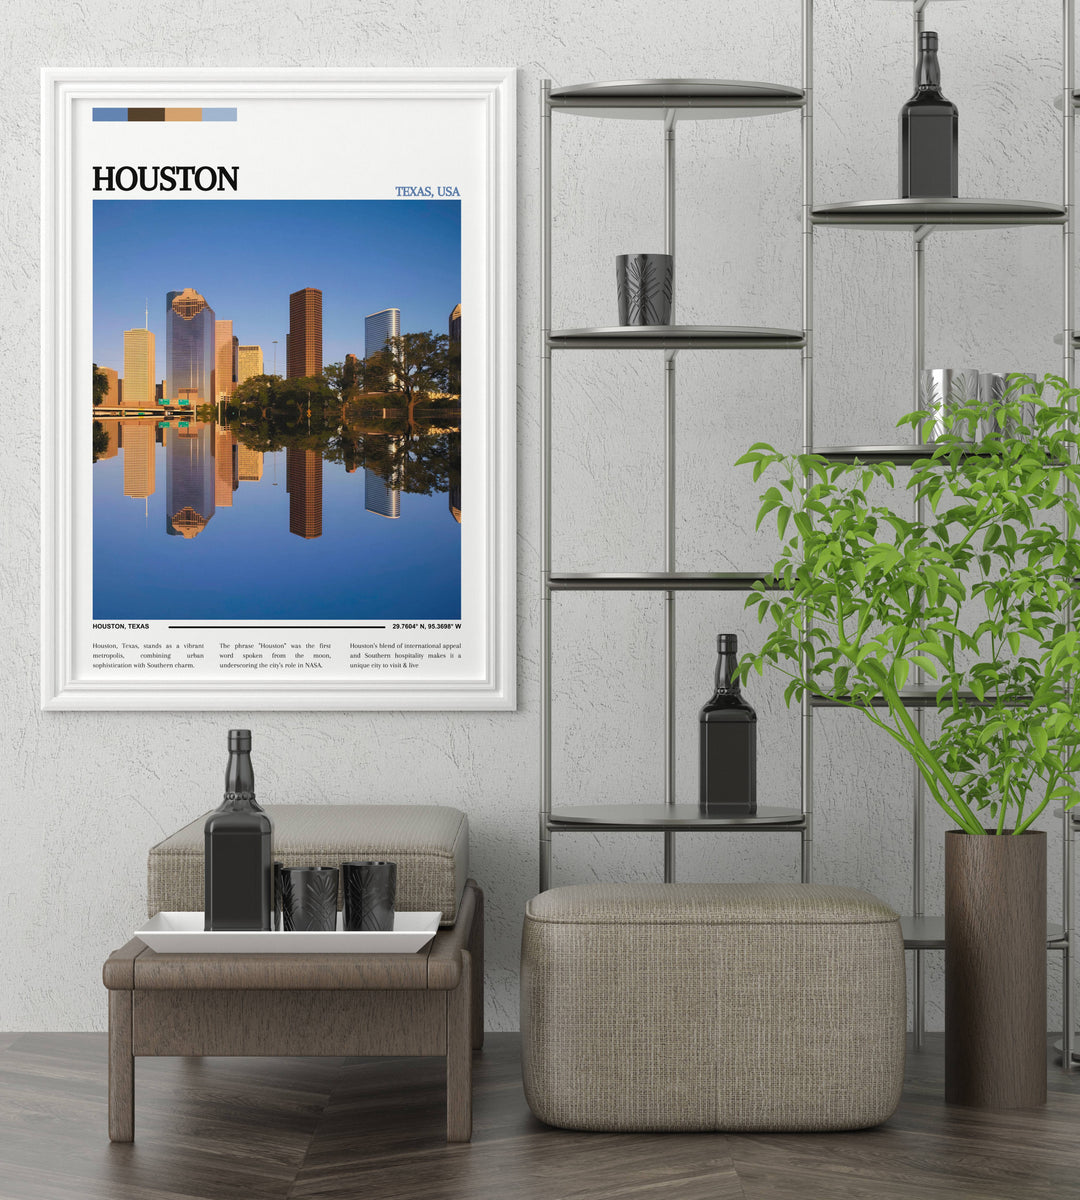 Modern Houston cityscape print, using bold lines and a minimalist black and white design to depict the silhouette of downtown buildings under a clear sky.